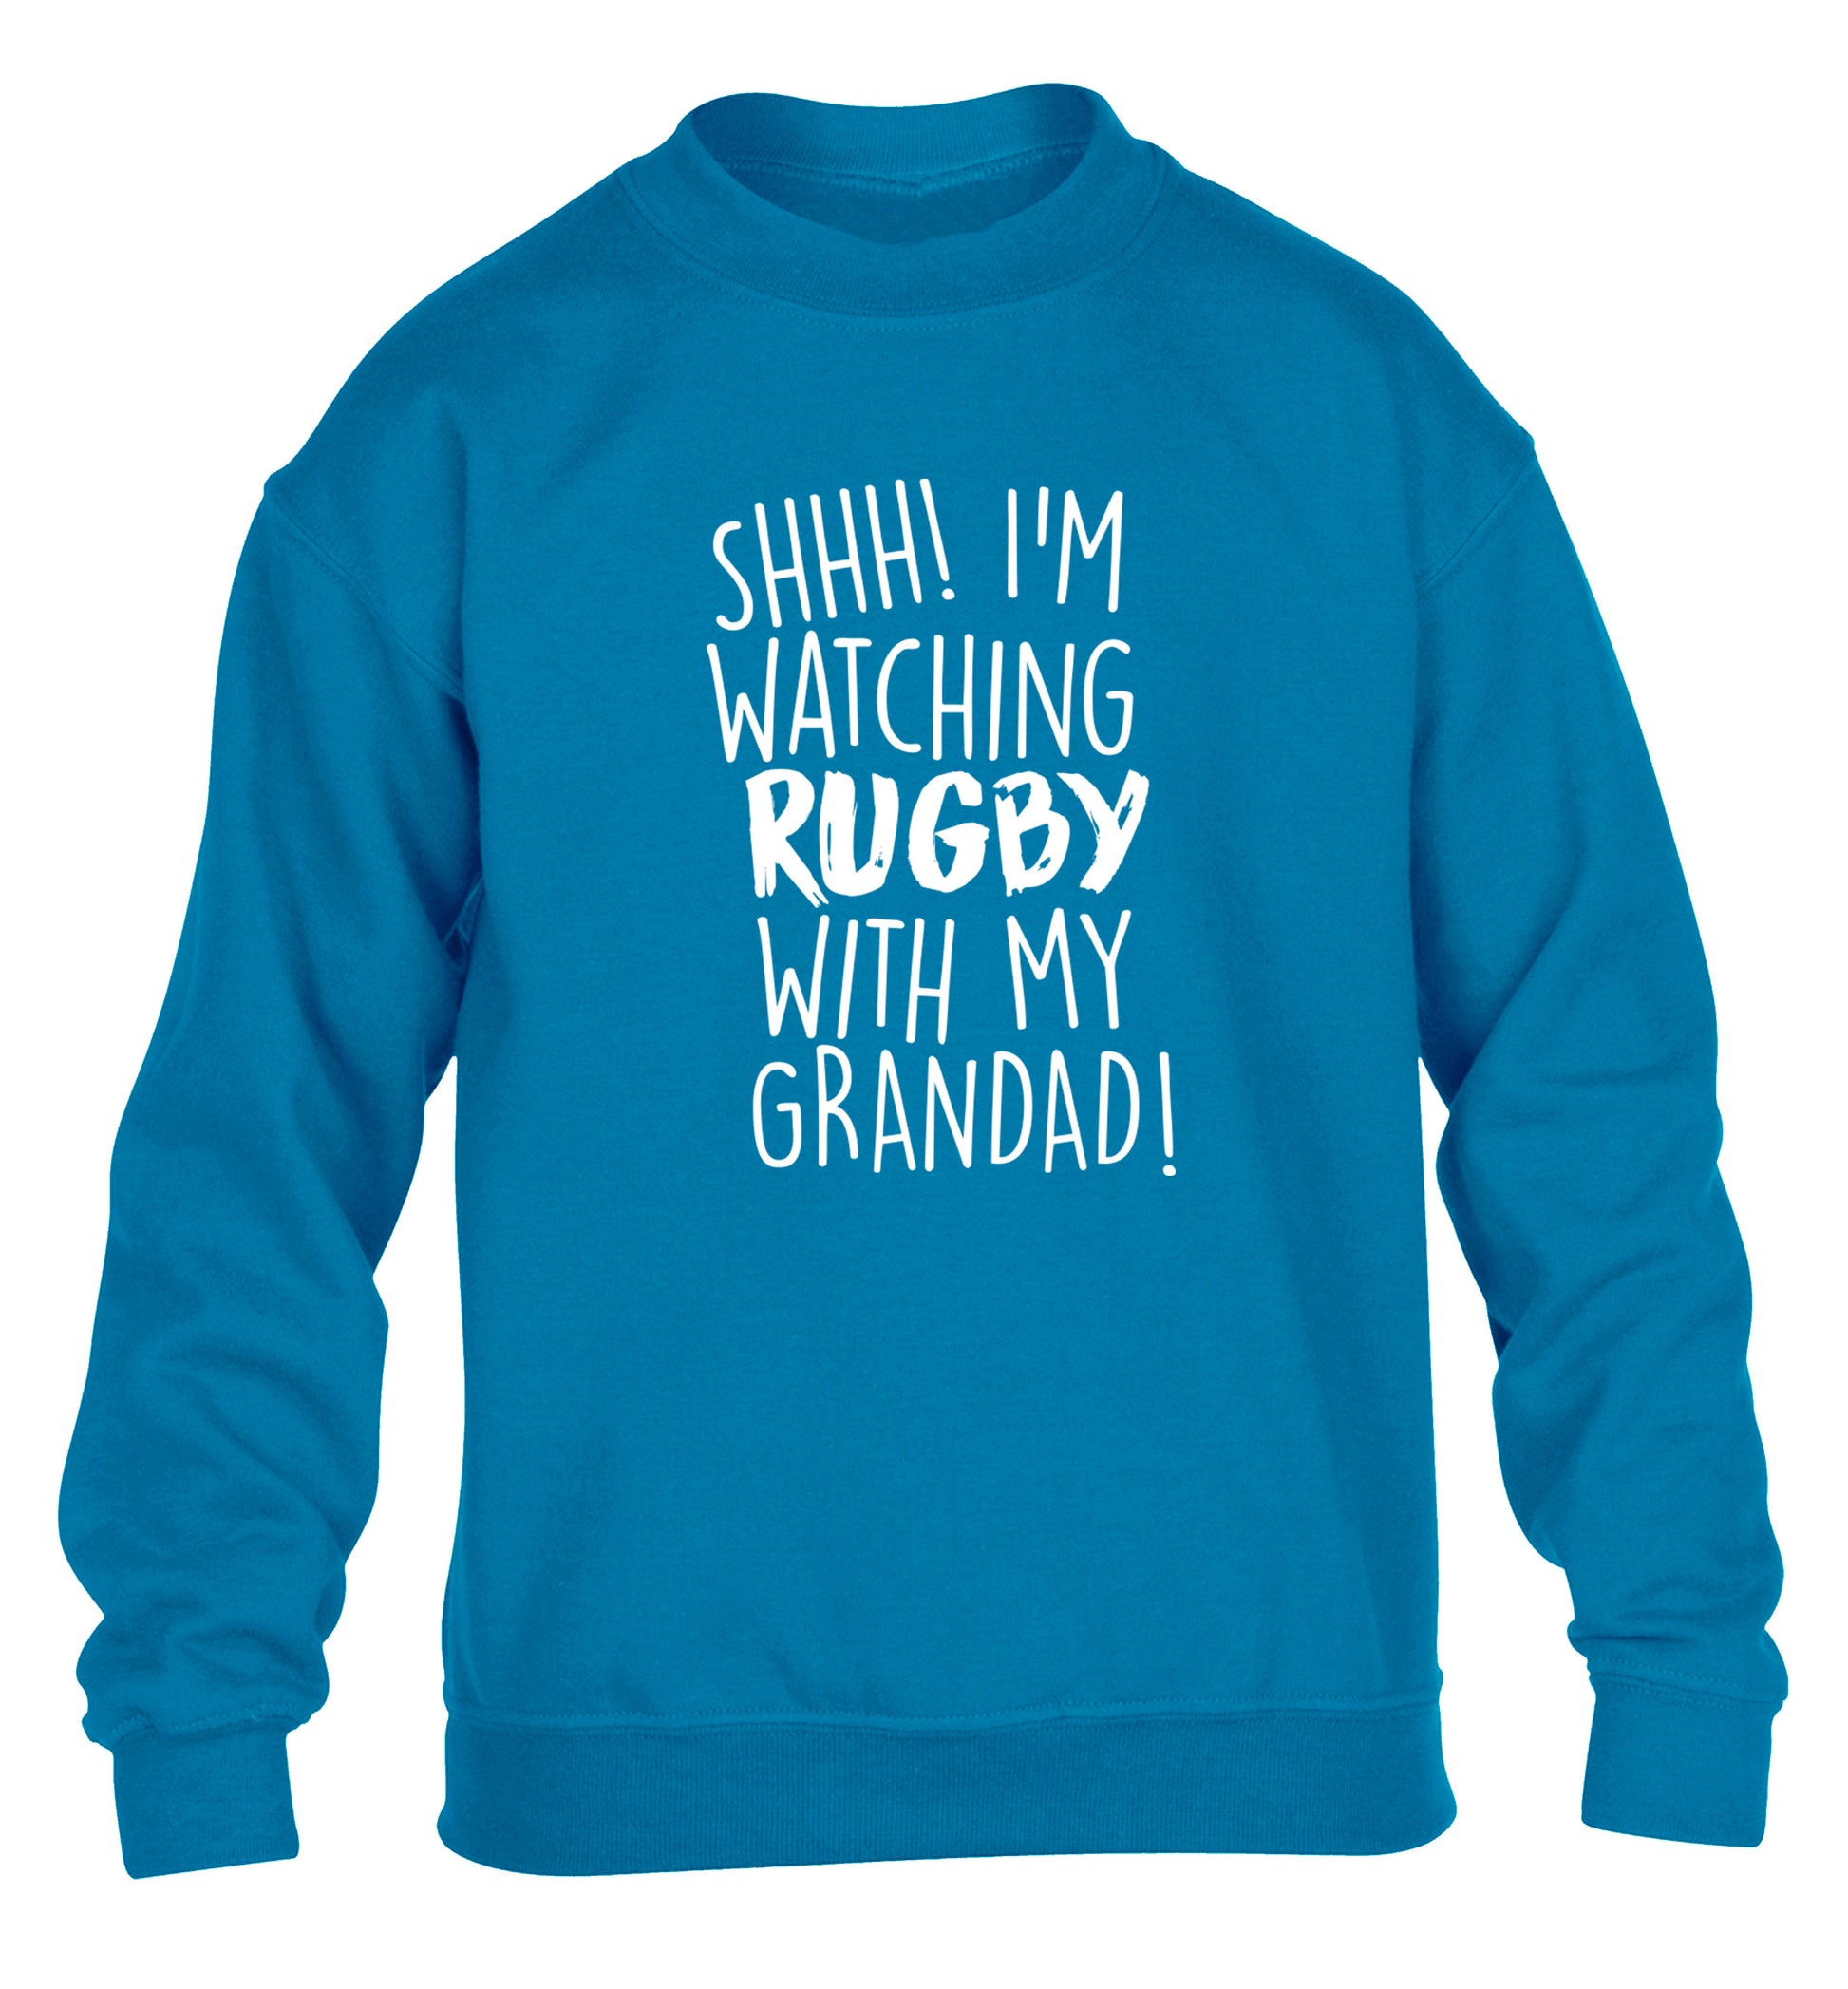 Shh I'm watching rugby with my grandad children's blue sweater 12-13 Years